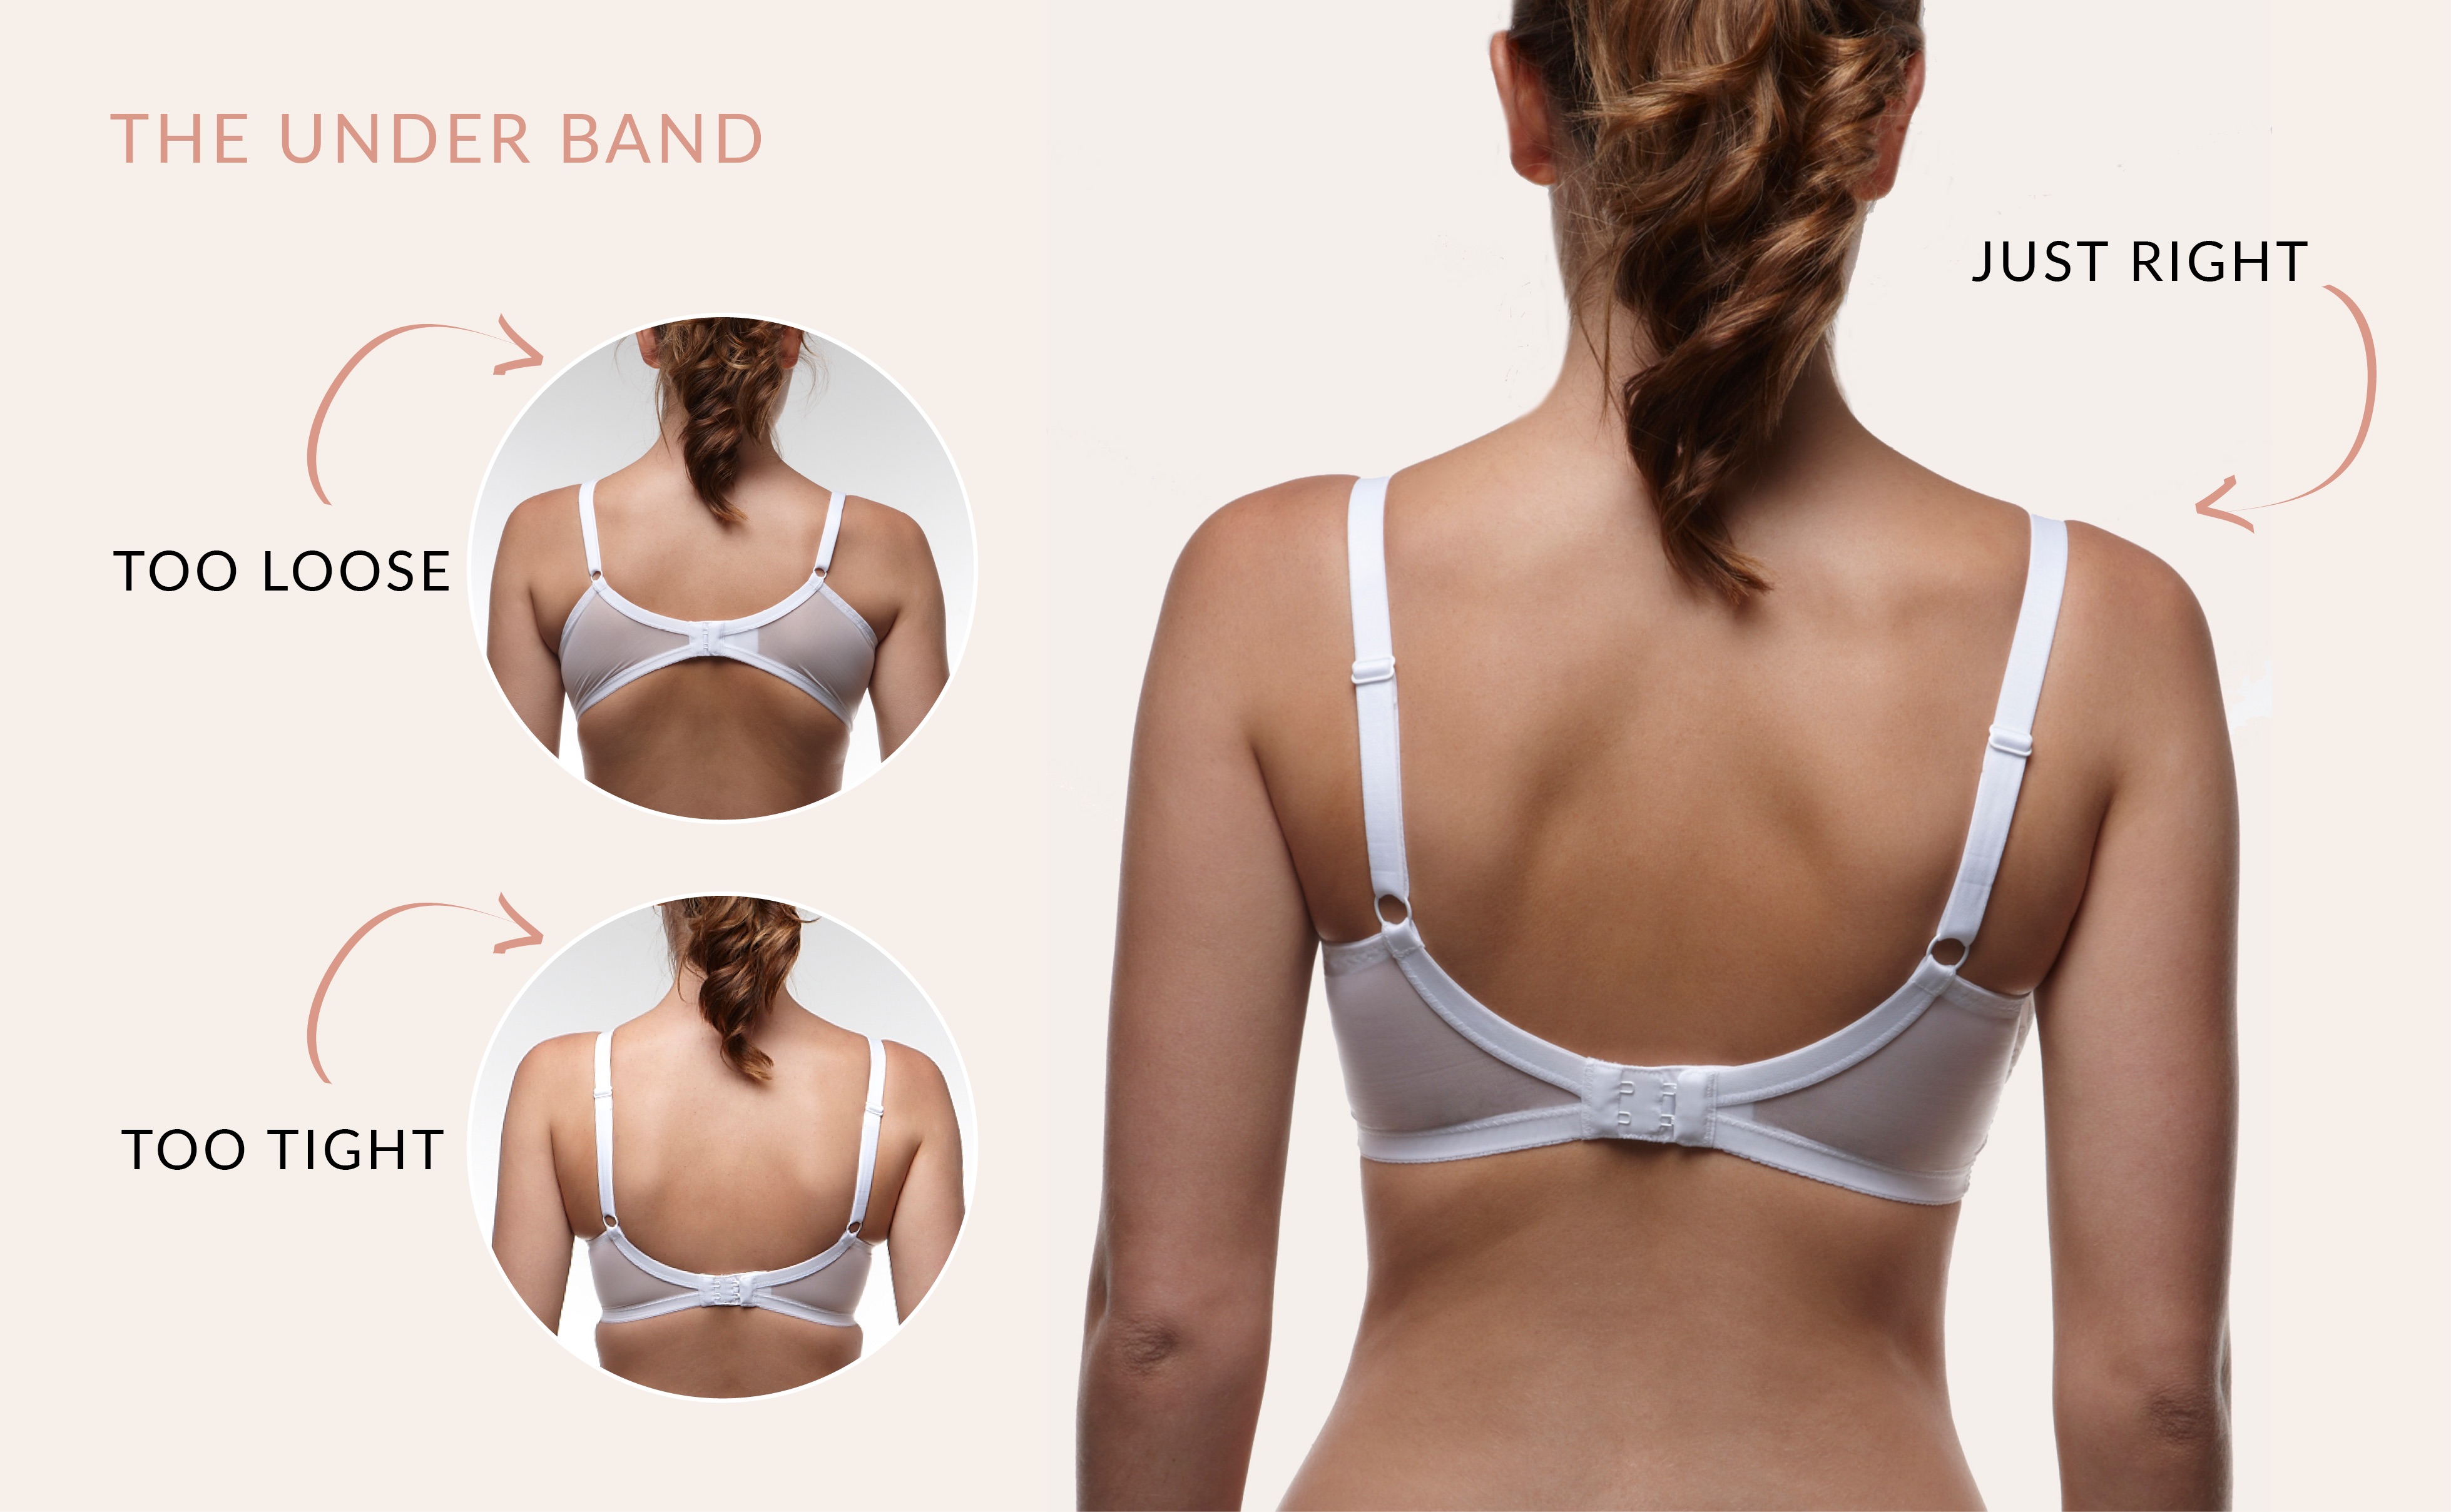 Finding the Perfect Fit: A Guide to How a Bra Should Properly Fit